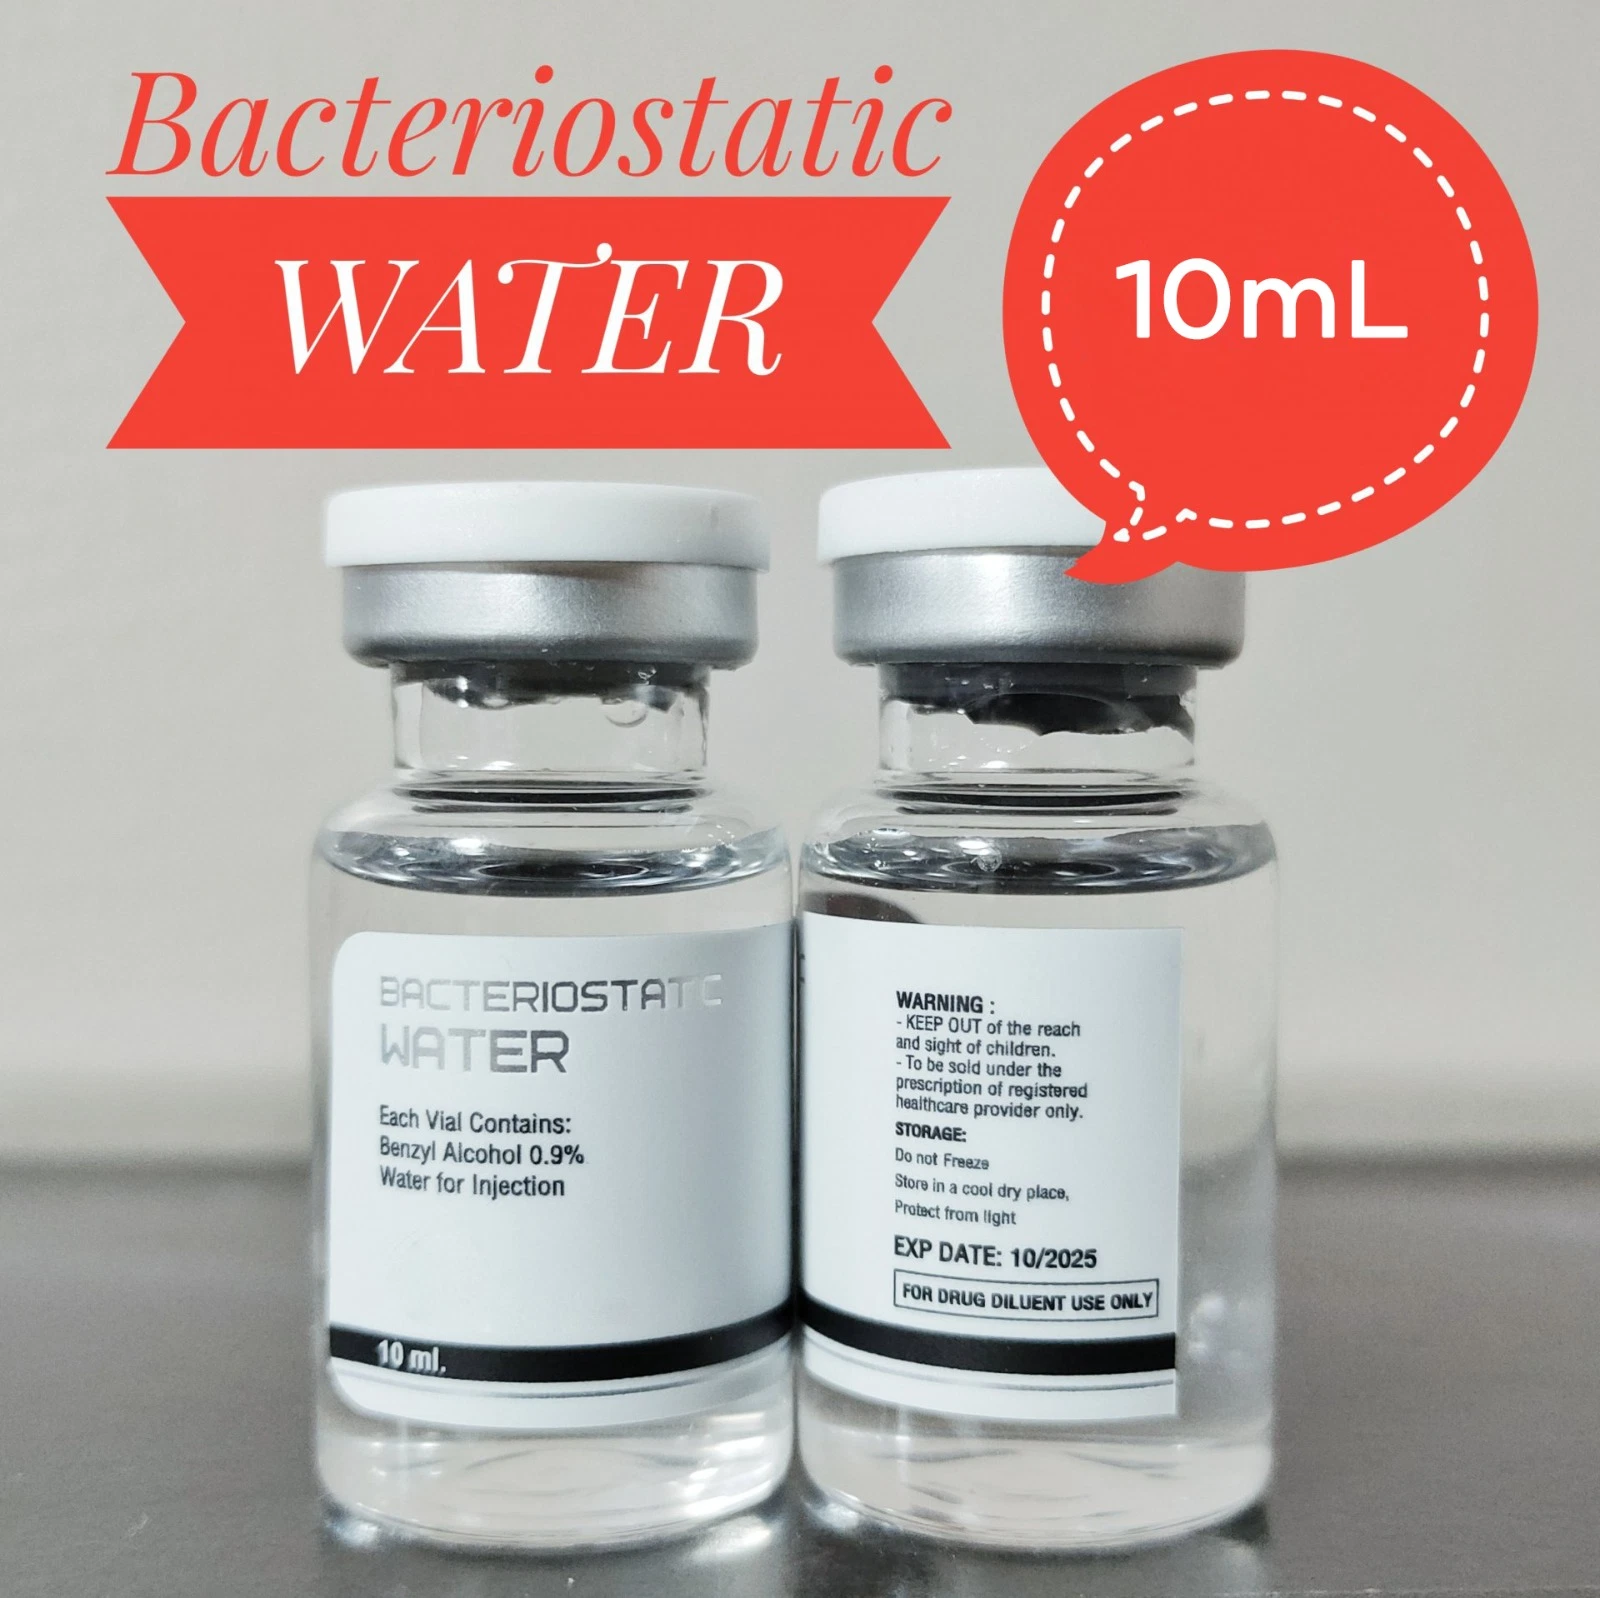 Hot Sale Bac Water Bacteriostatic Water Has 0.9% Benzylalcohol